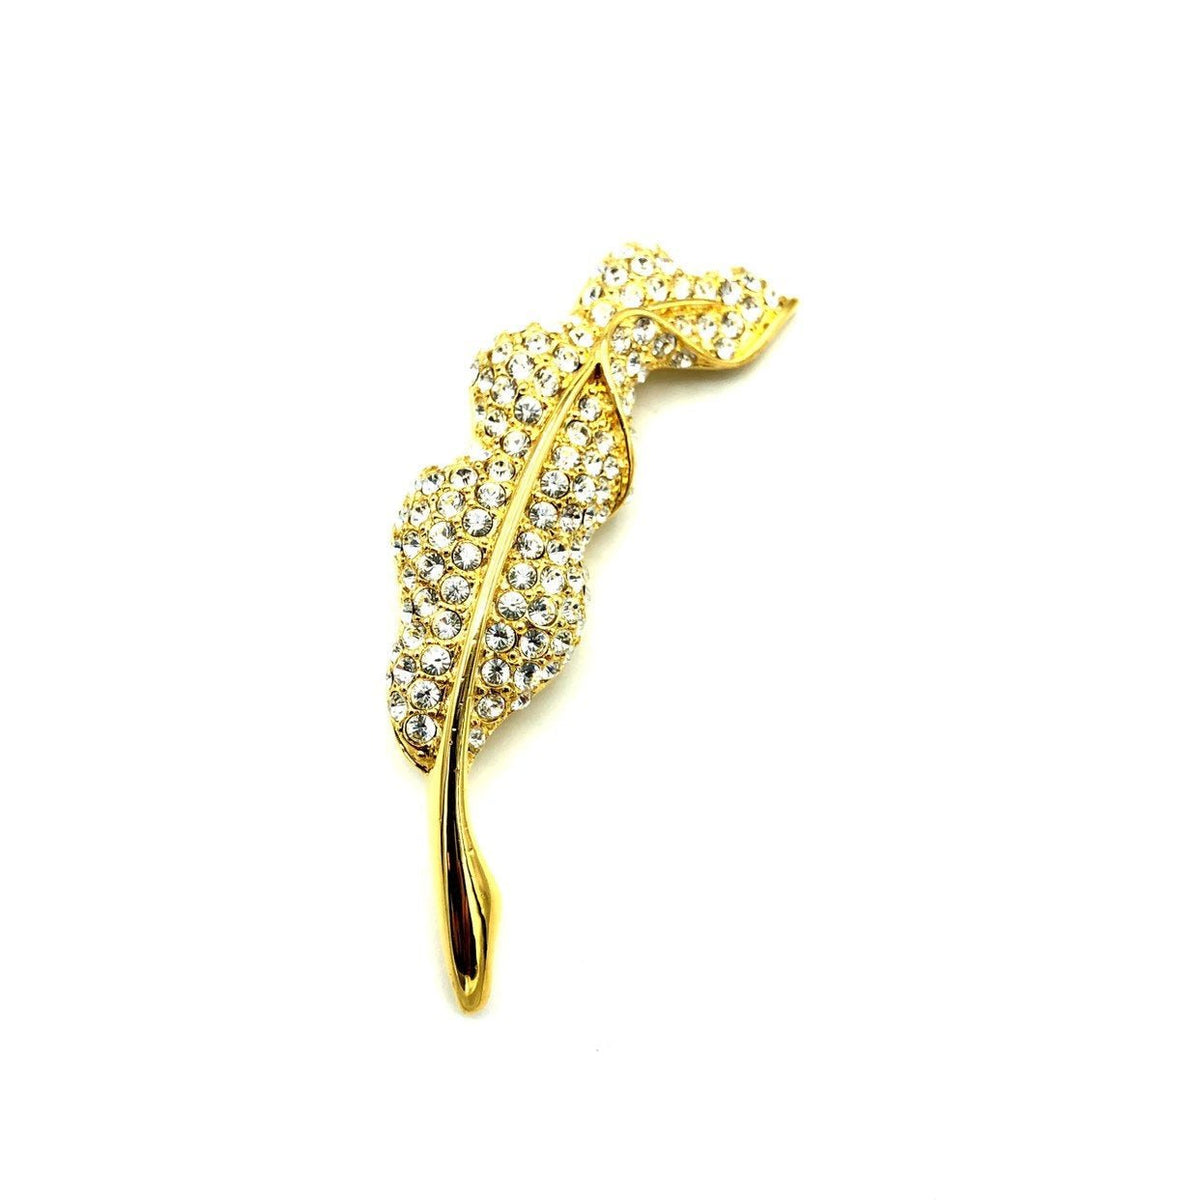 Vintage Gold Napier Pave Rhinestone Feather Brooch - 24 Wishes Vintage Jewelry